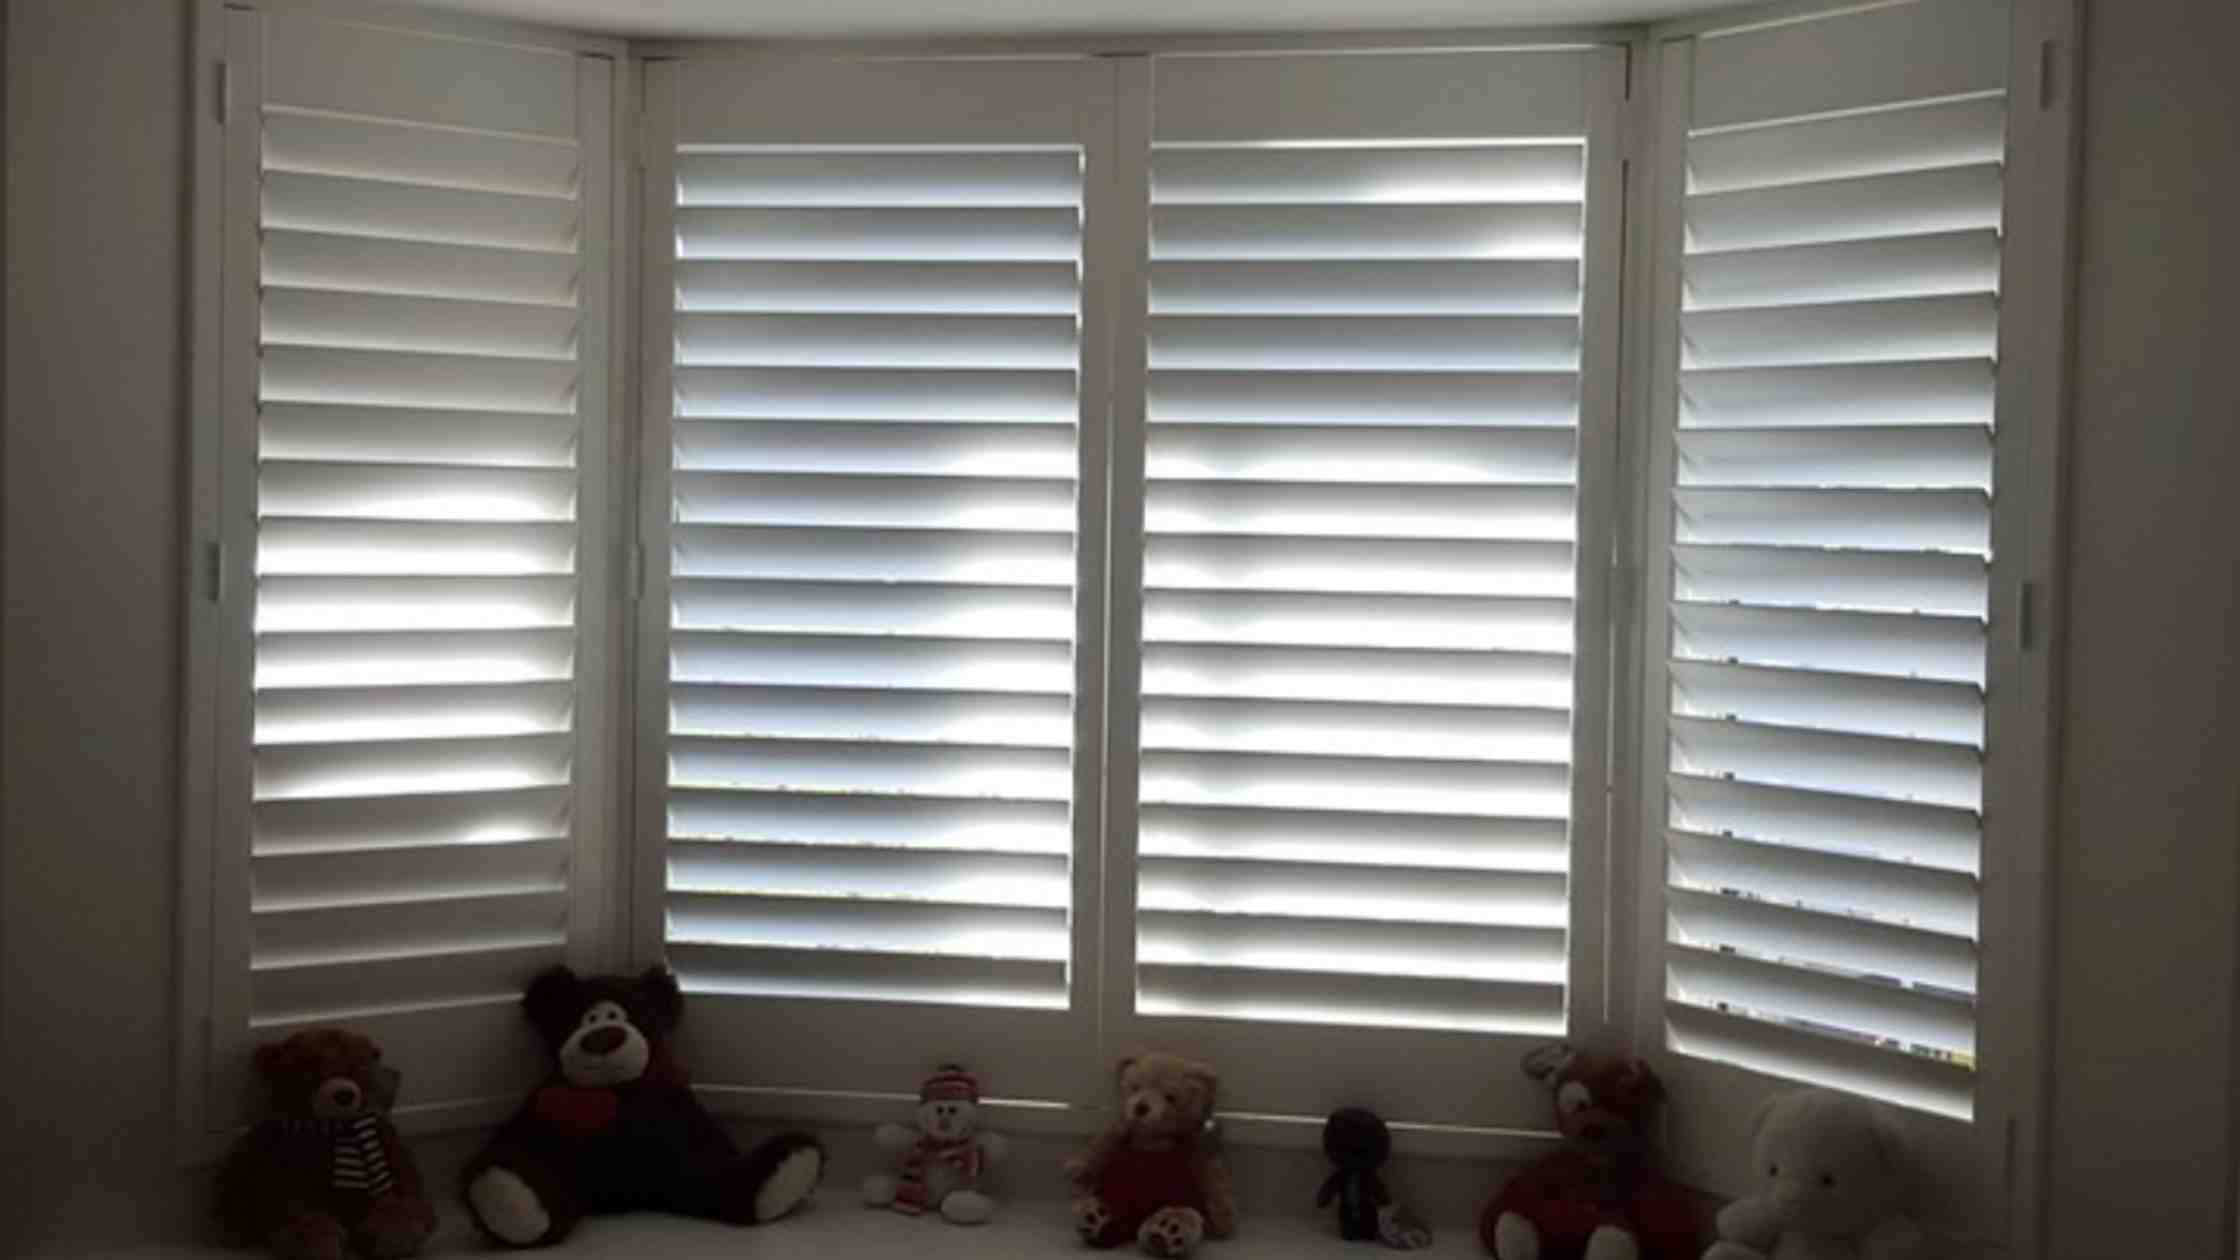 How Convenient Are Shutters For Bedrooms?